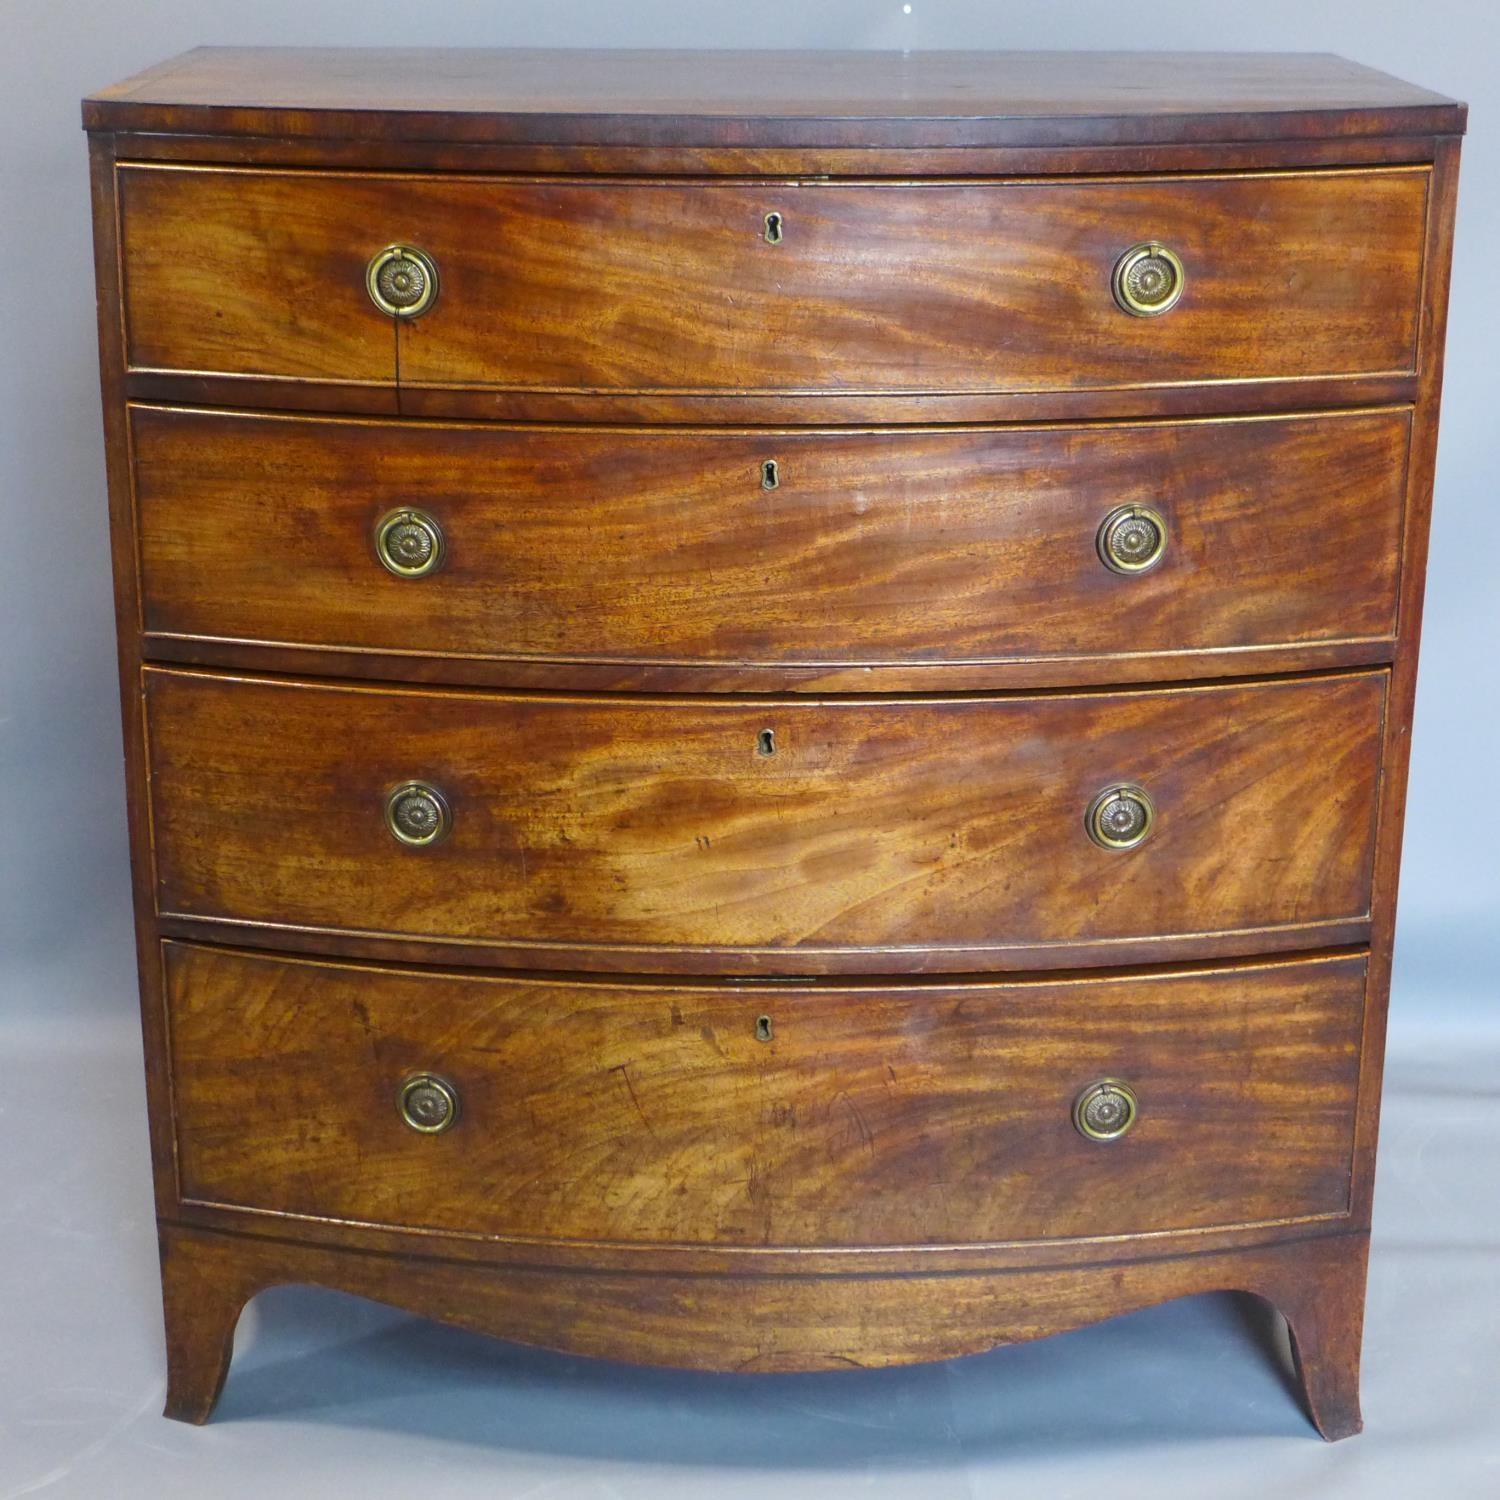 A George III mahogany bow fronted chest of 4 drawers, on splayed legs, H.107 W.98 D.56cm